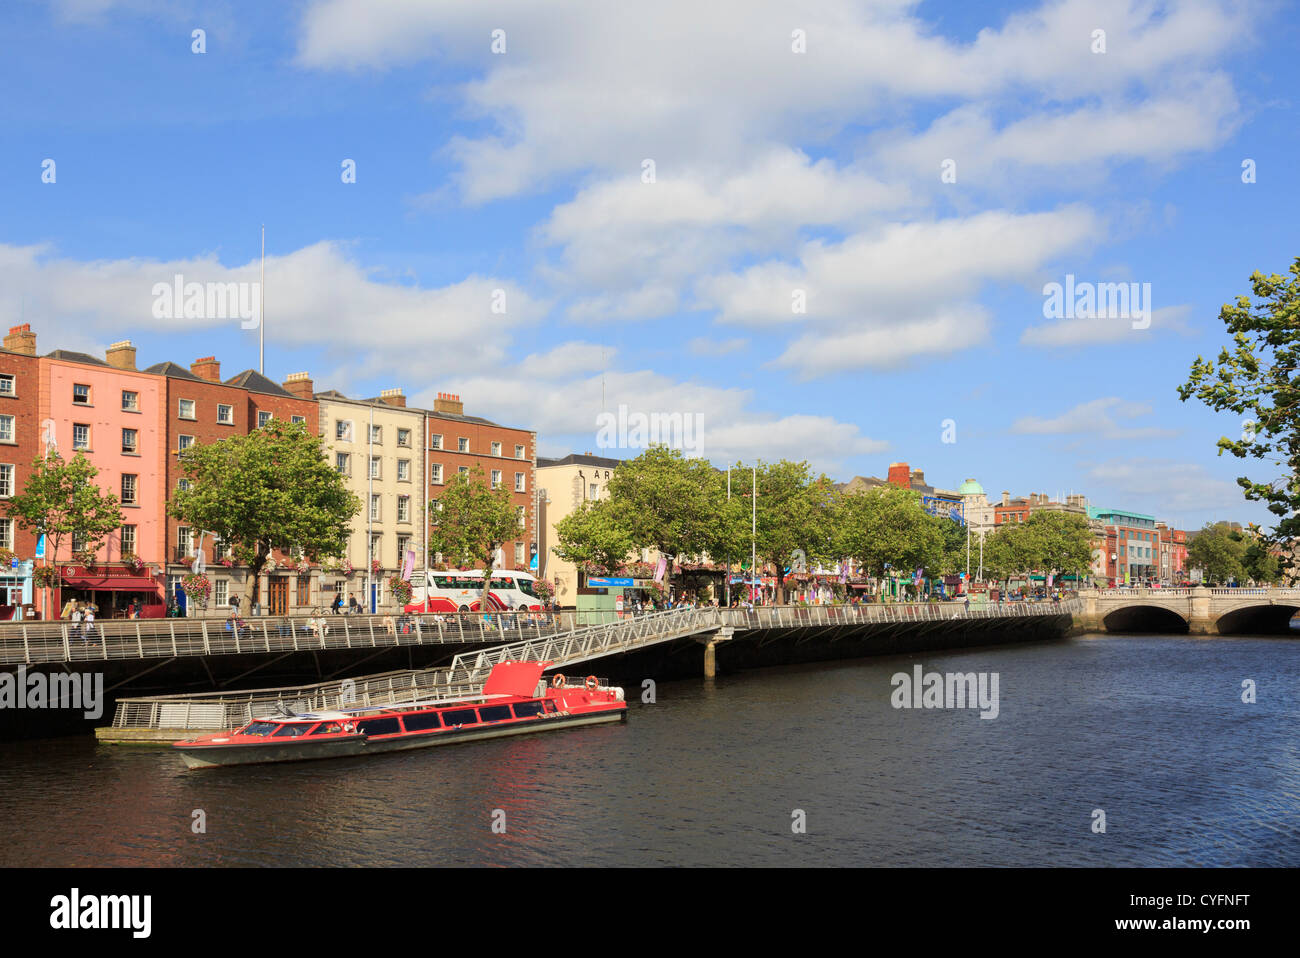 View across the River Liffey to Batchelor's Walk with cruise boat moored by jetty from Temple Bar, Dublin, Ireland, Eire Stock Photo